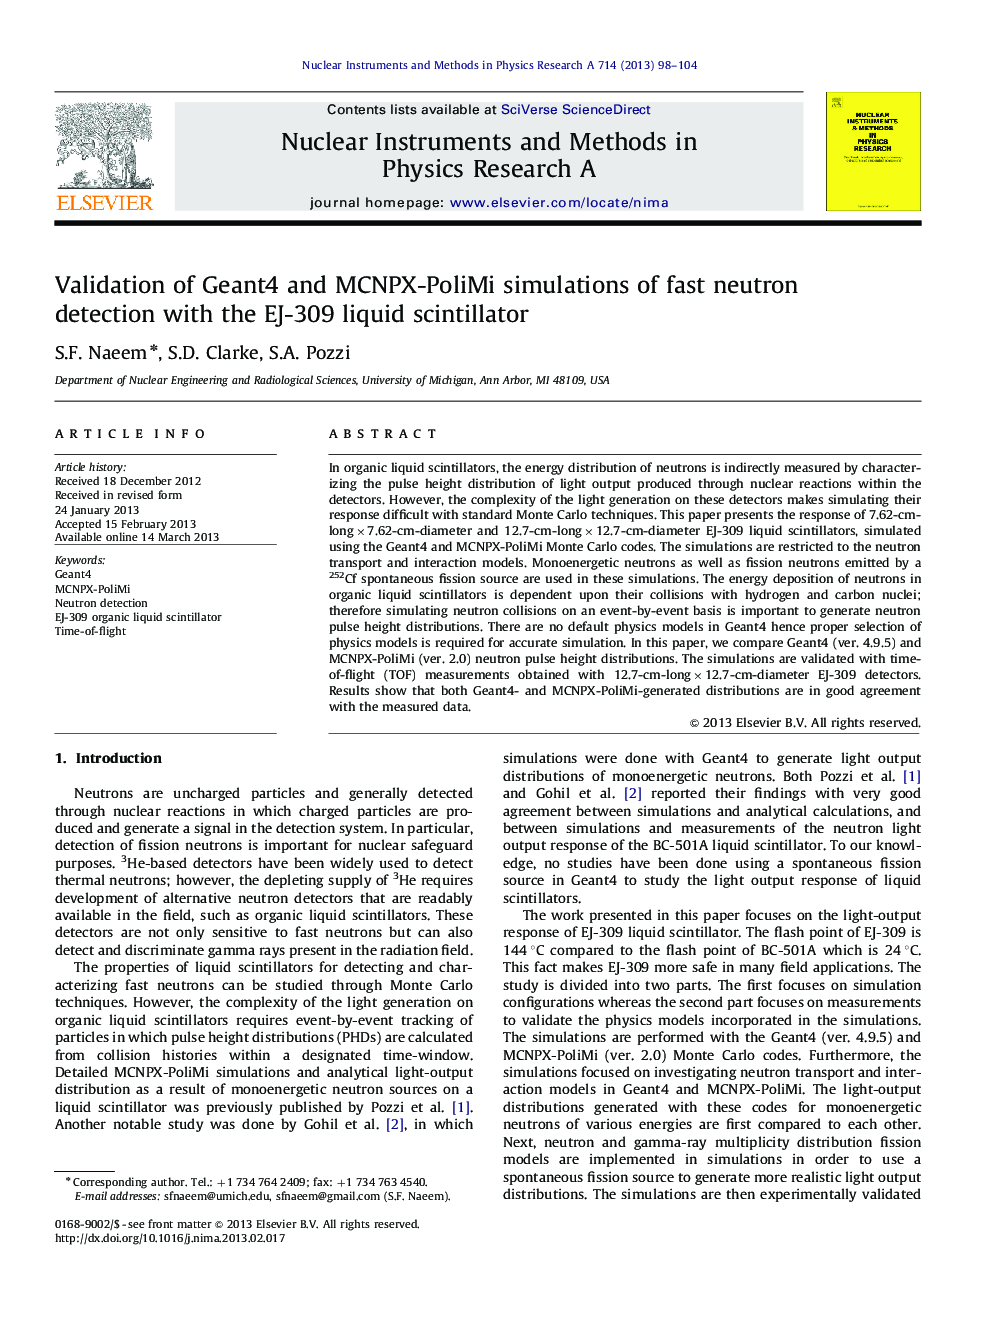 Validation of Geant4 and MCNPX-PoliMi simulations of fast neutron detection with the EJ-309 liquid scintillator